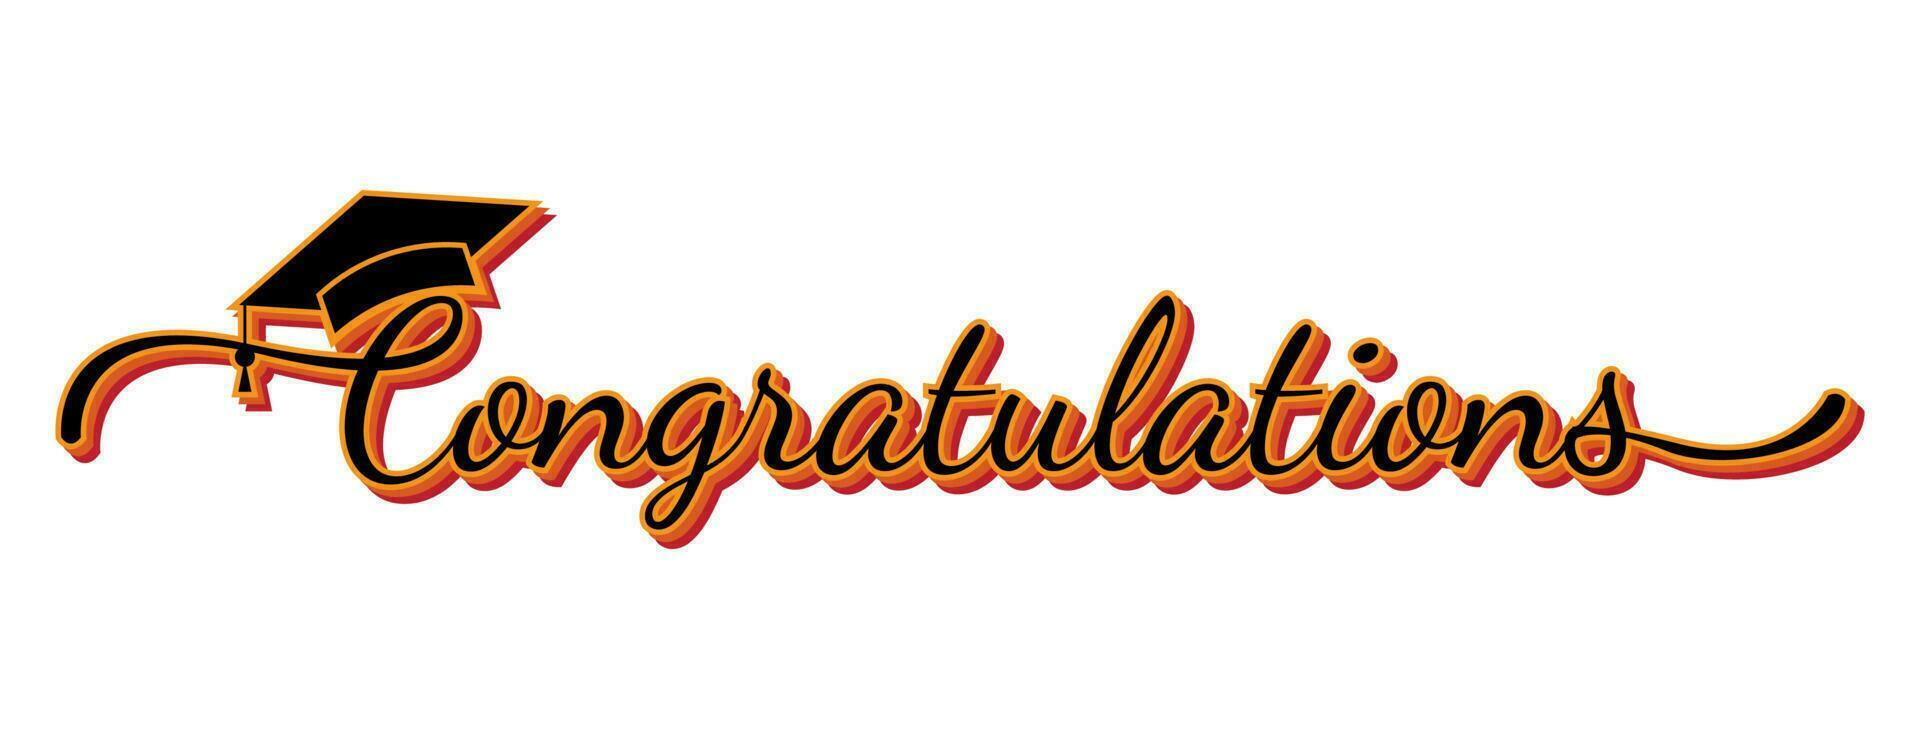 congratulation typography lettering vector design for greeting in orange and blue color